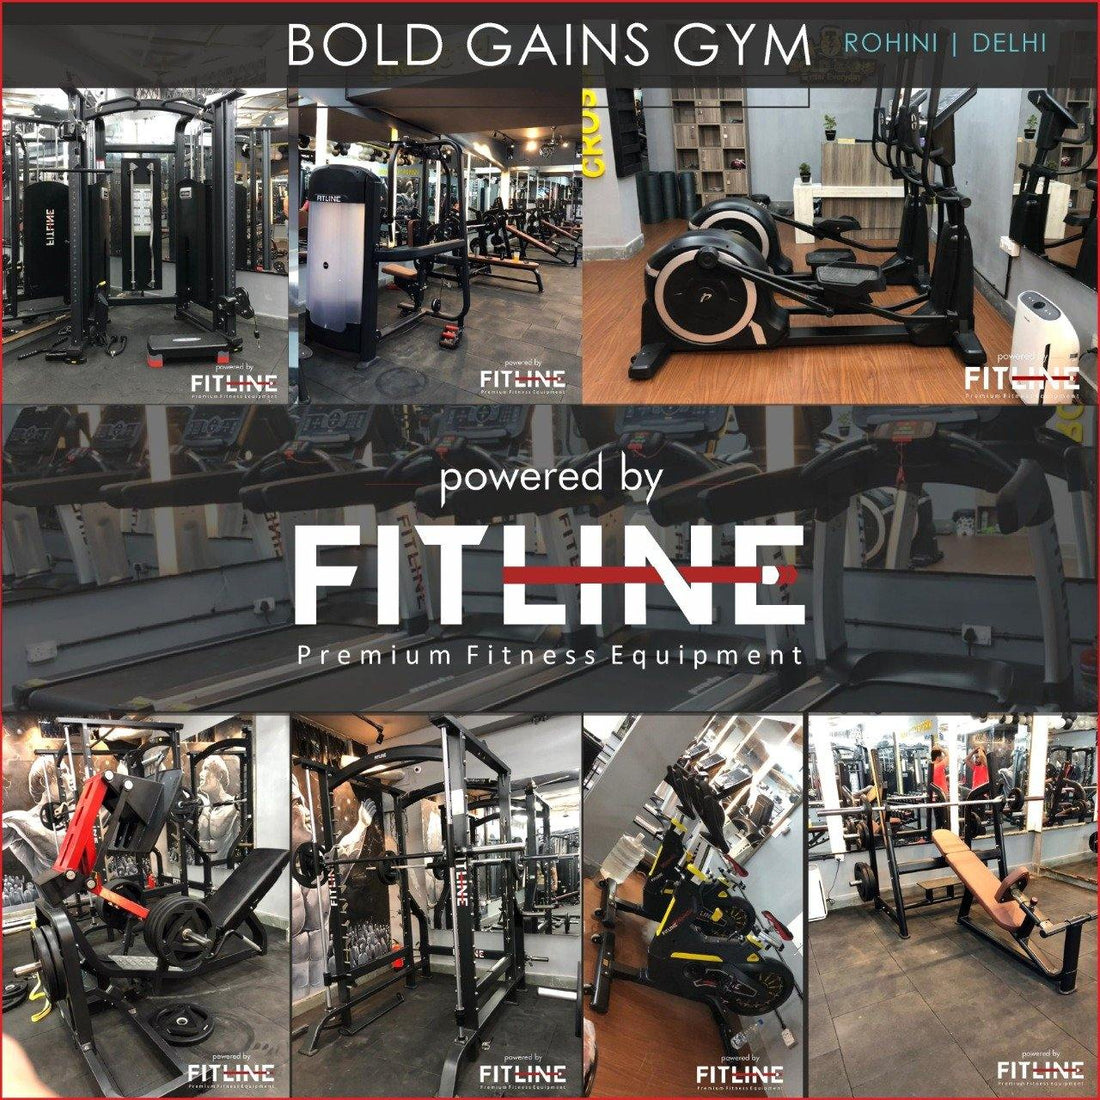 Latest installation by FitLine (BOLD GAINS GYM) - Fitline India